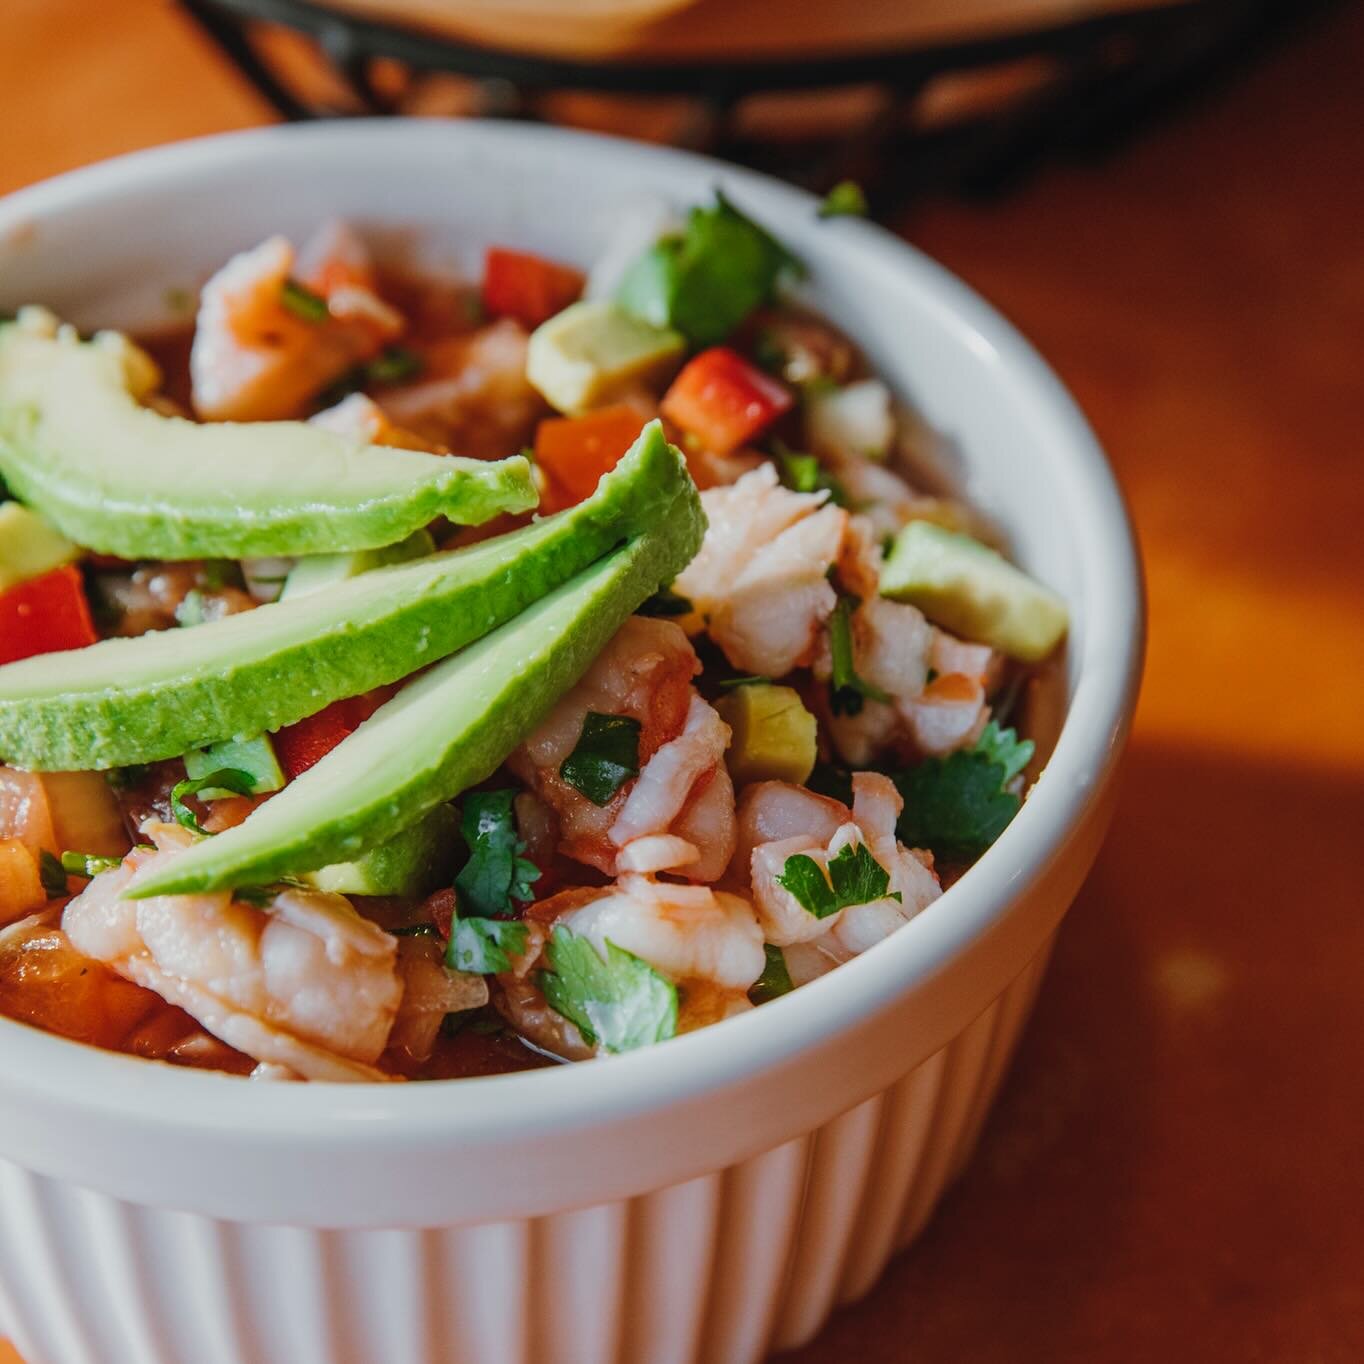 Indulge in the vibrant flavors of our fresh ceviche!